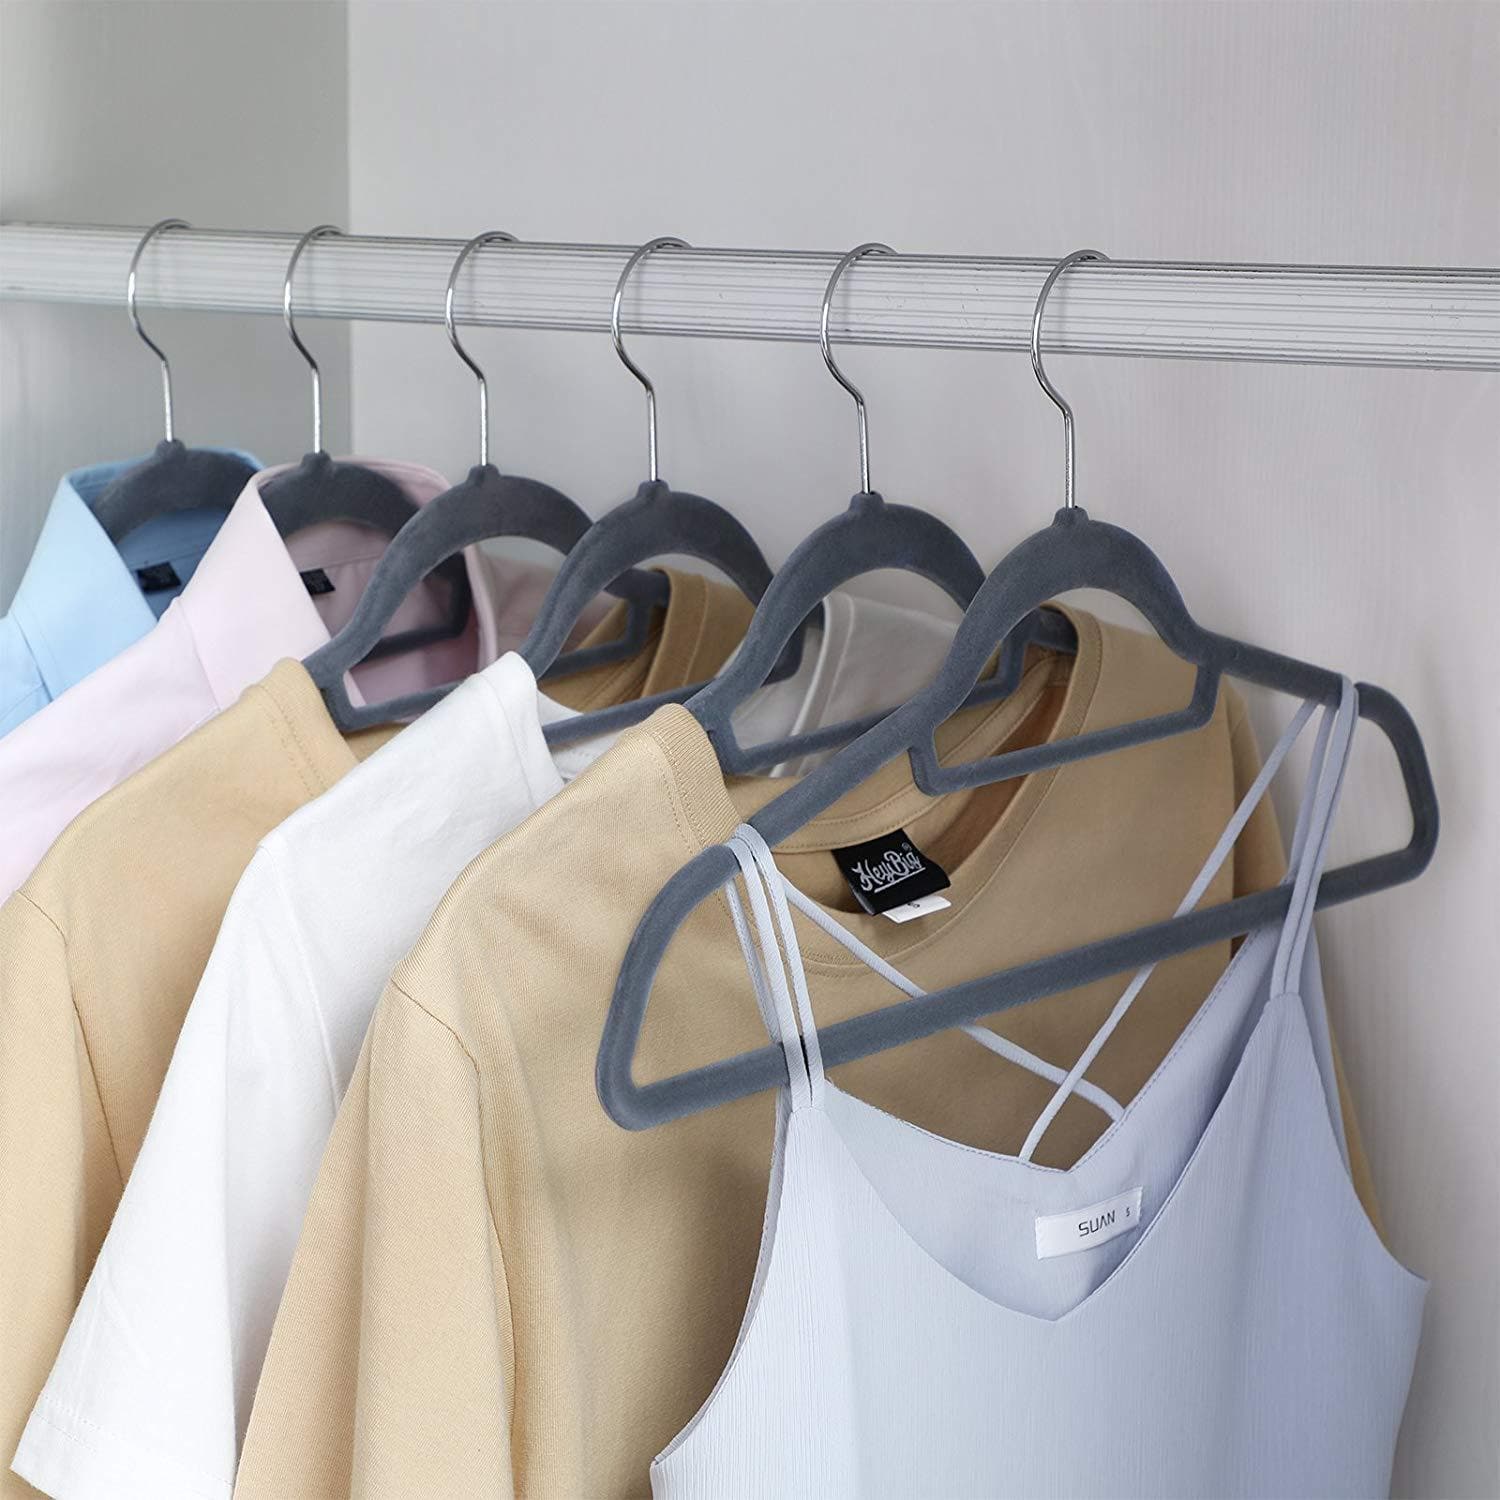 Nancy's - Space Saving Non-Slip Clothes Hangers - 20 Pieces - Ultra Thin Clothes Hangers with 360 degree swivel hook - Clothes hangers